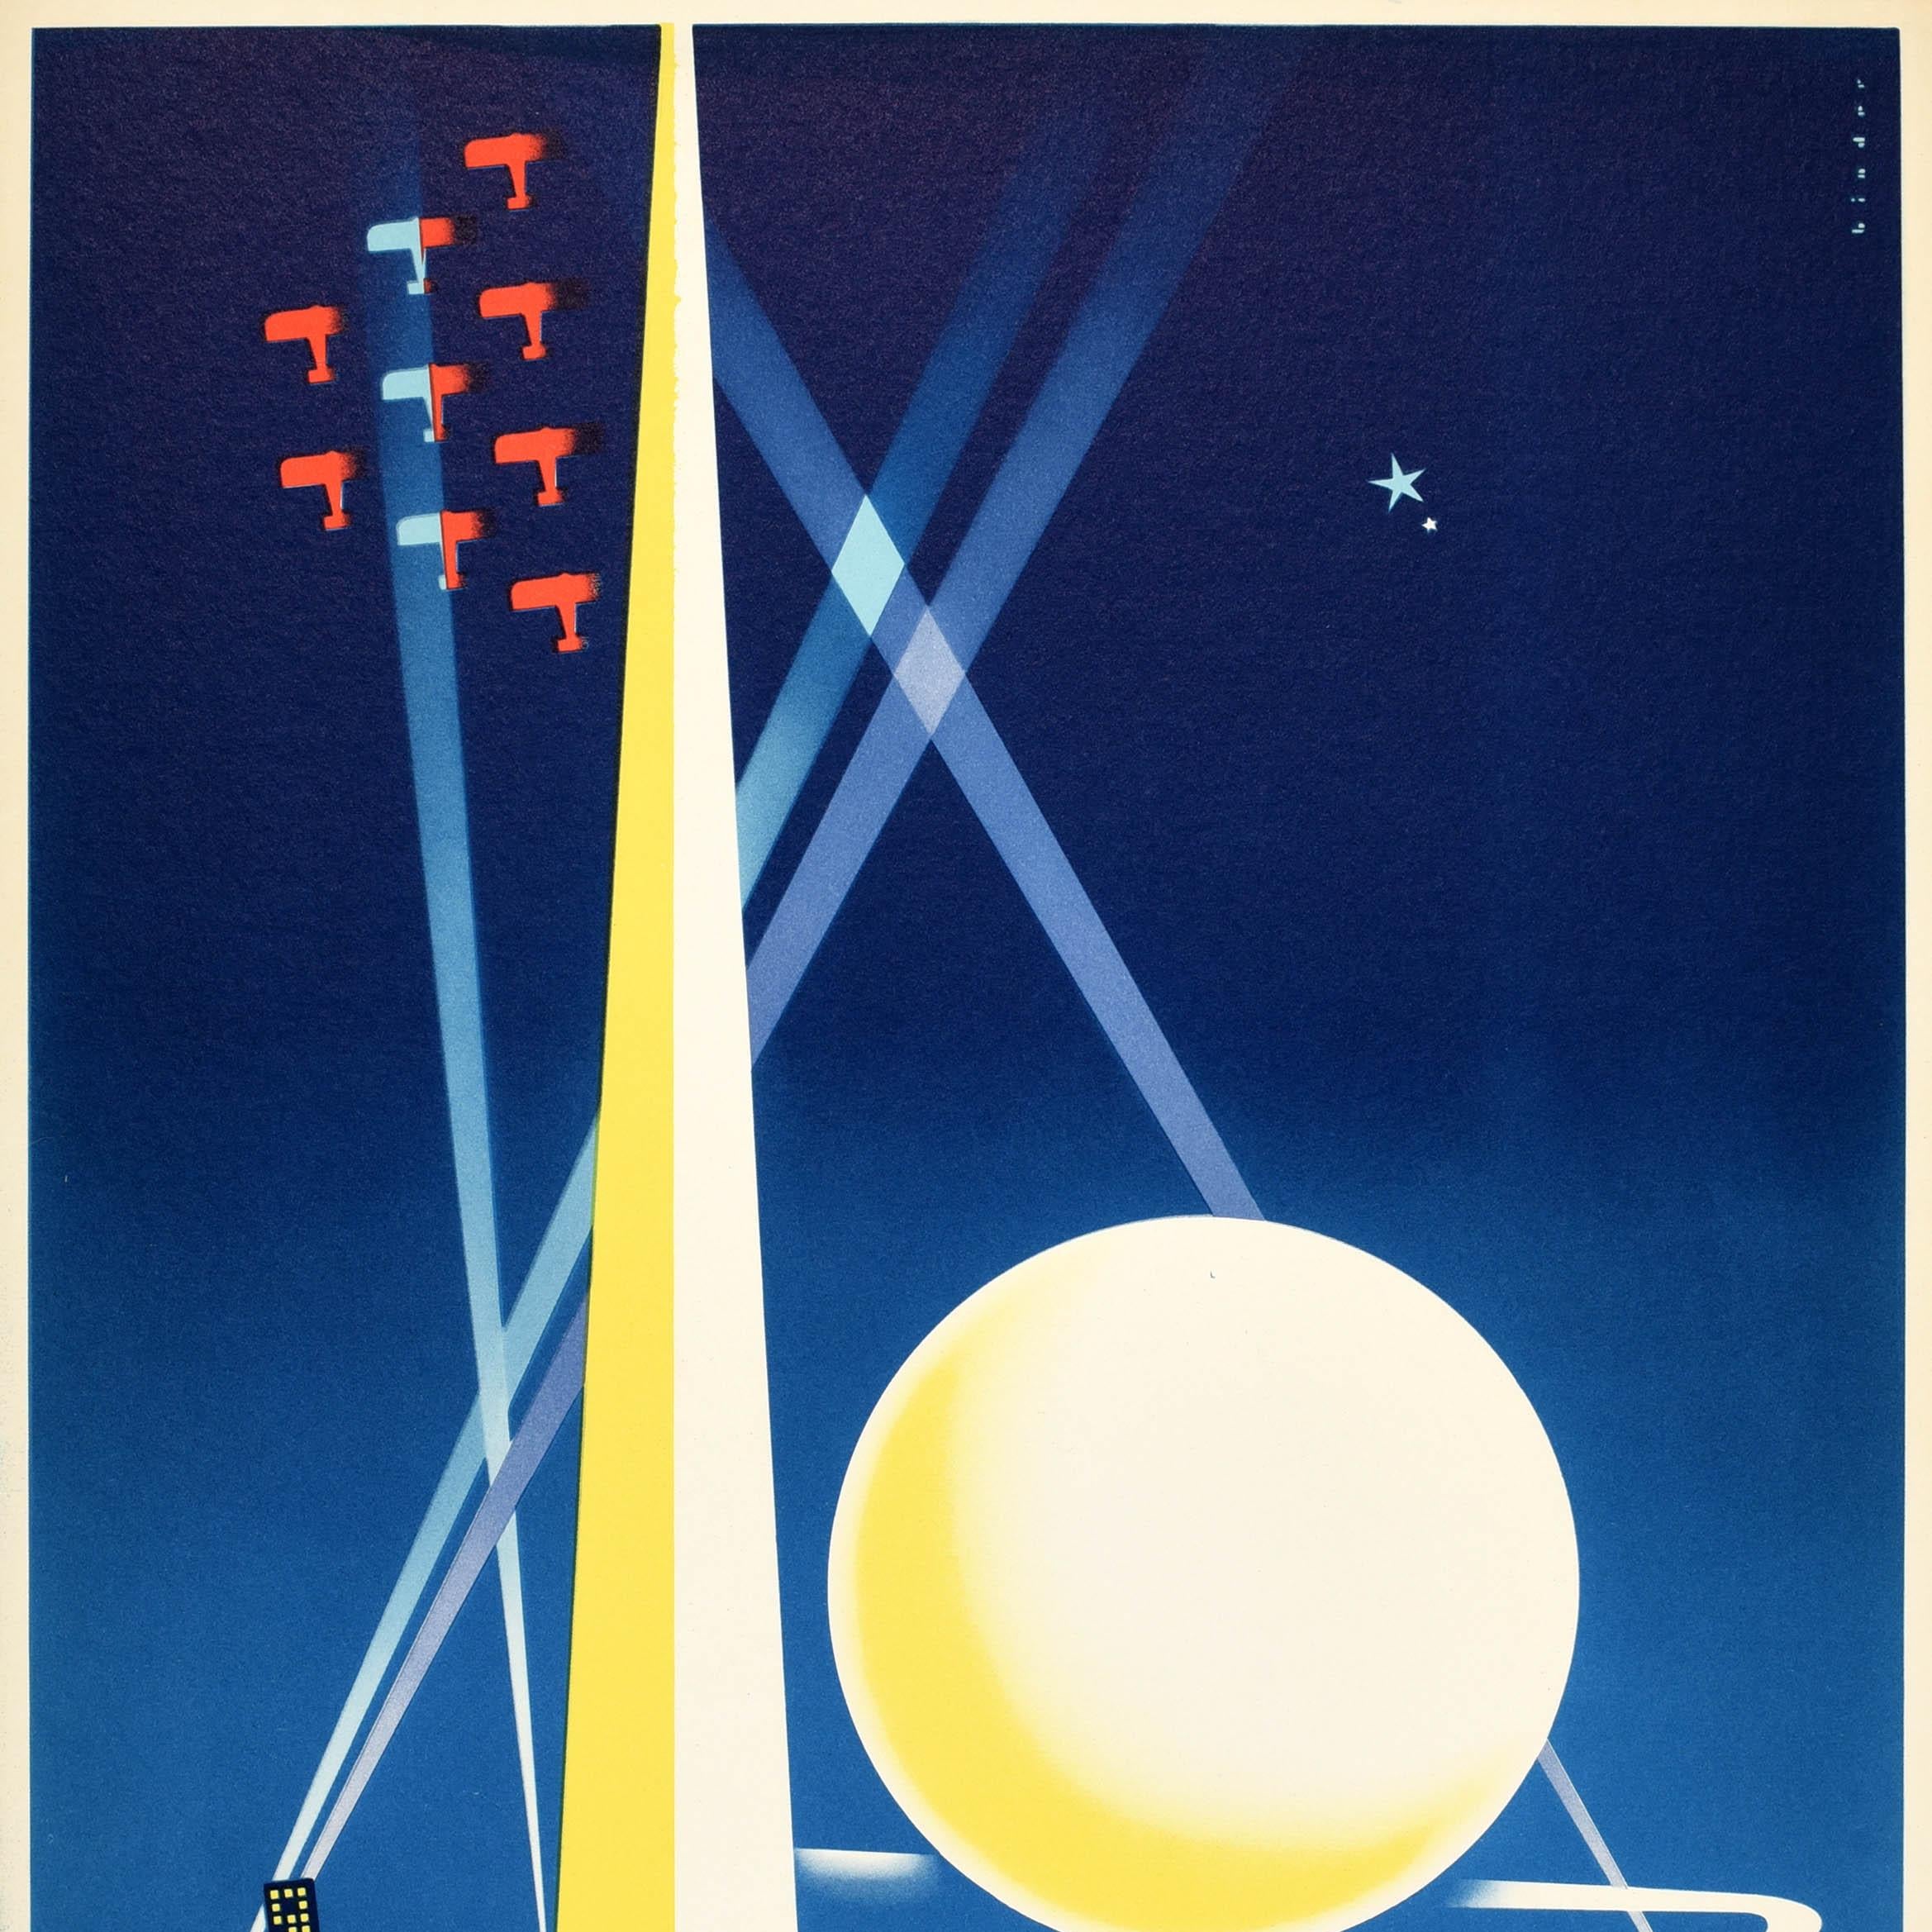 Original Vintage Travel Advertising Poster New York Worlds Fair Binder Art Deco In Excellent Condition For Sale In London, GB